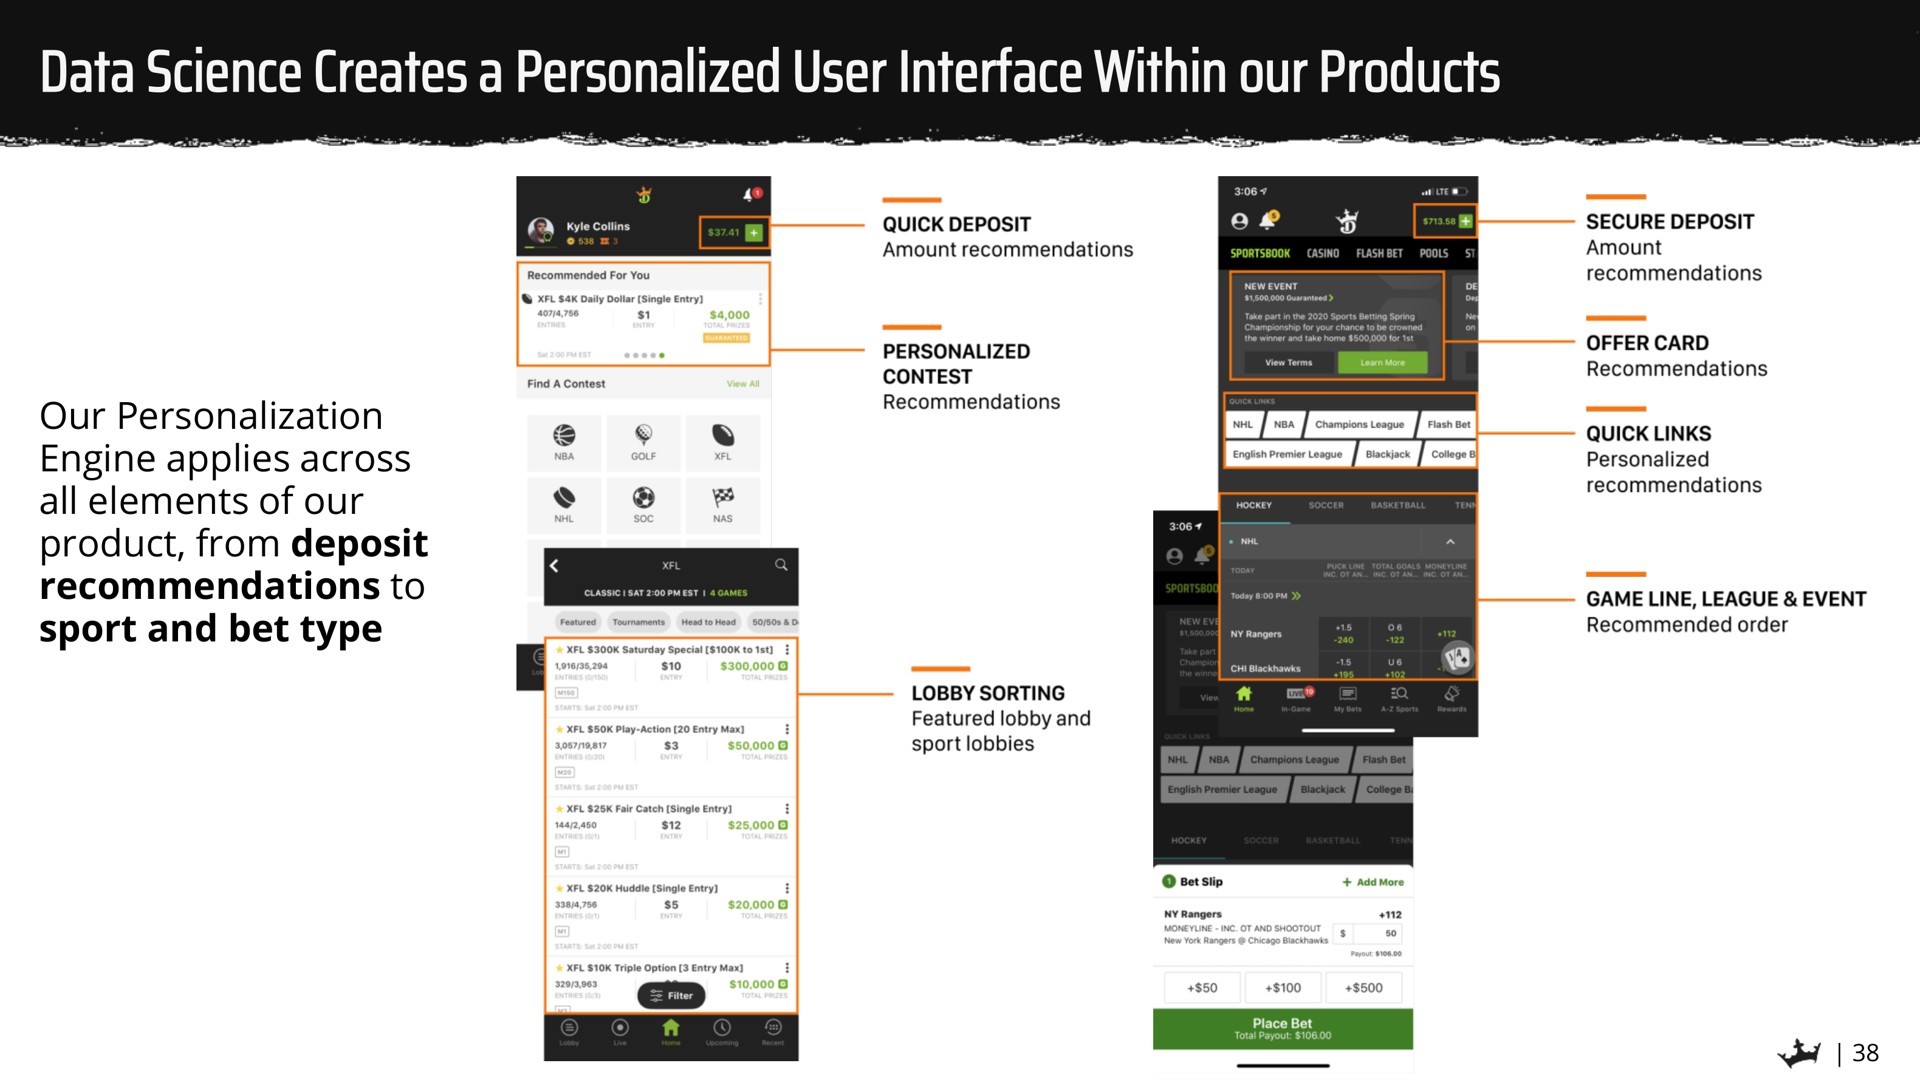 data science creates a personalized user interface within our products | DraftKings